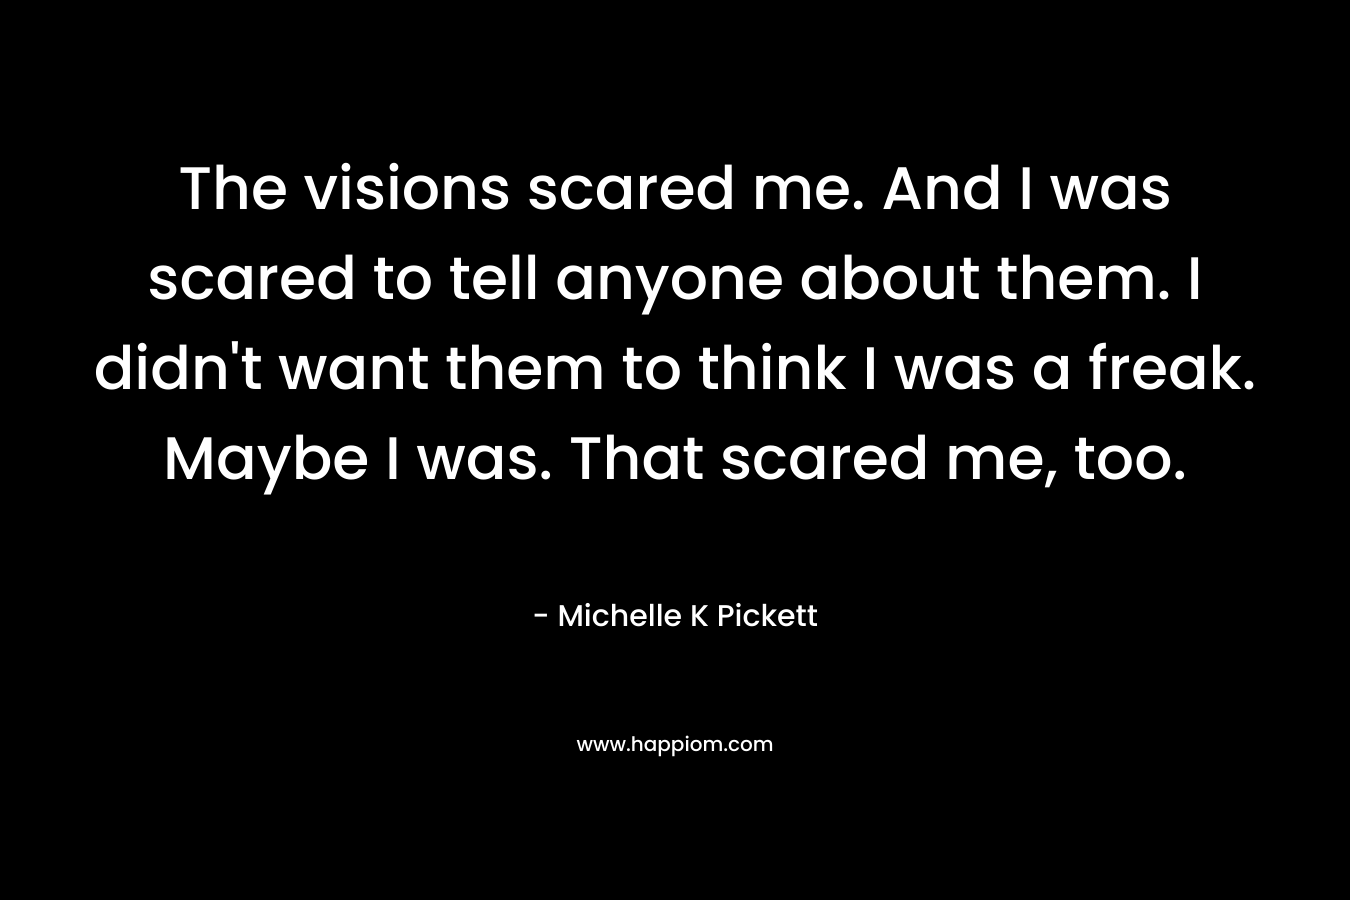 The visions scared me. And I was scared to tell anyone about them. I didn't want them to think I was a freak. Maybe I was. That scared me, too.